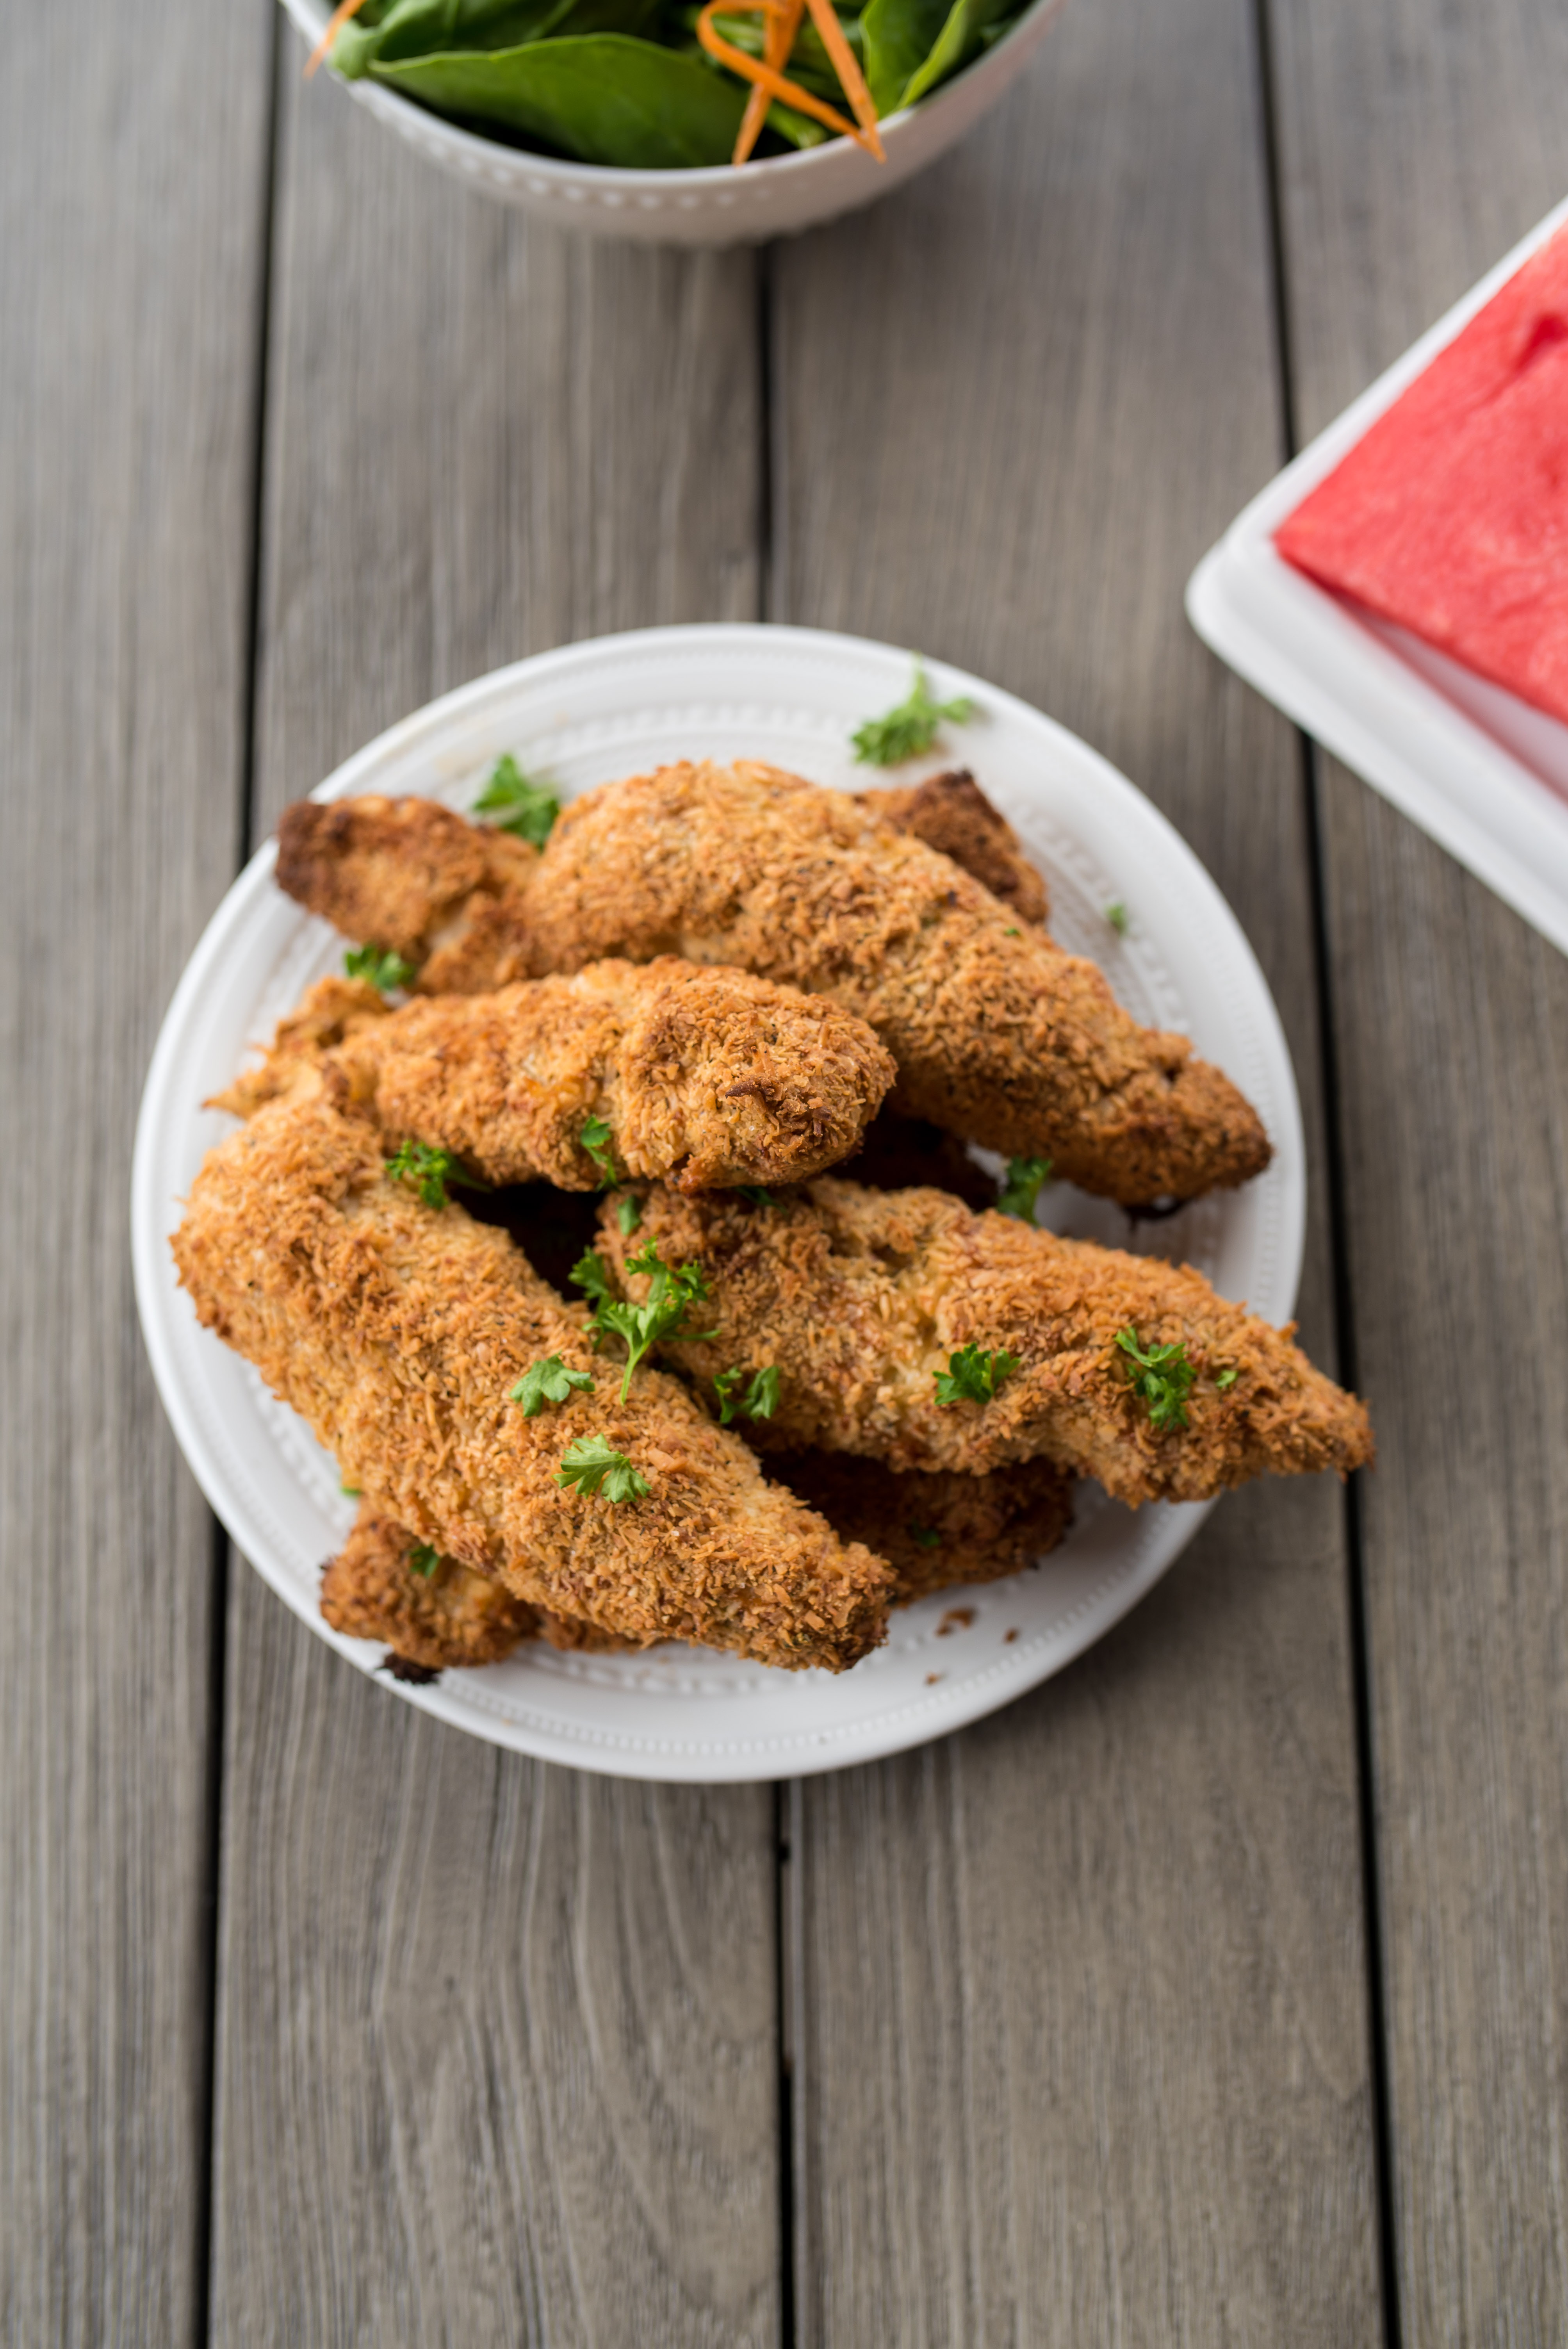 Crispy, Whole30 Chicken tenders breaded with seasoned almond flour, unsweetened coconut and BAKED to perfect! Delicious when dunked in dairy- free, roasted garlic ranch and are freezer friendly! The whole family will love these Whole30 Chicken Tenders.